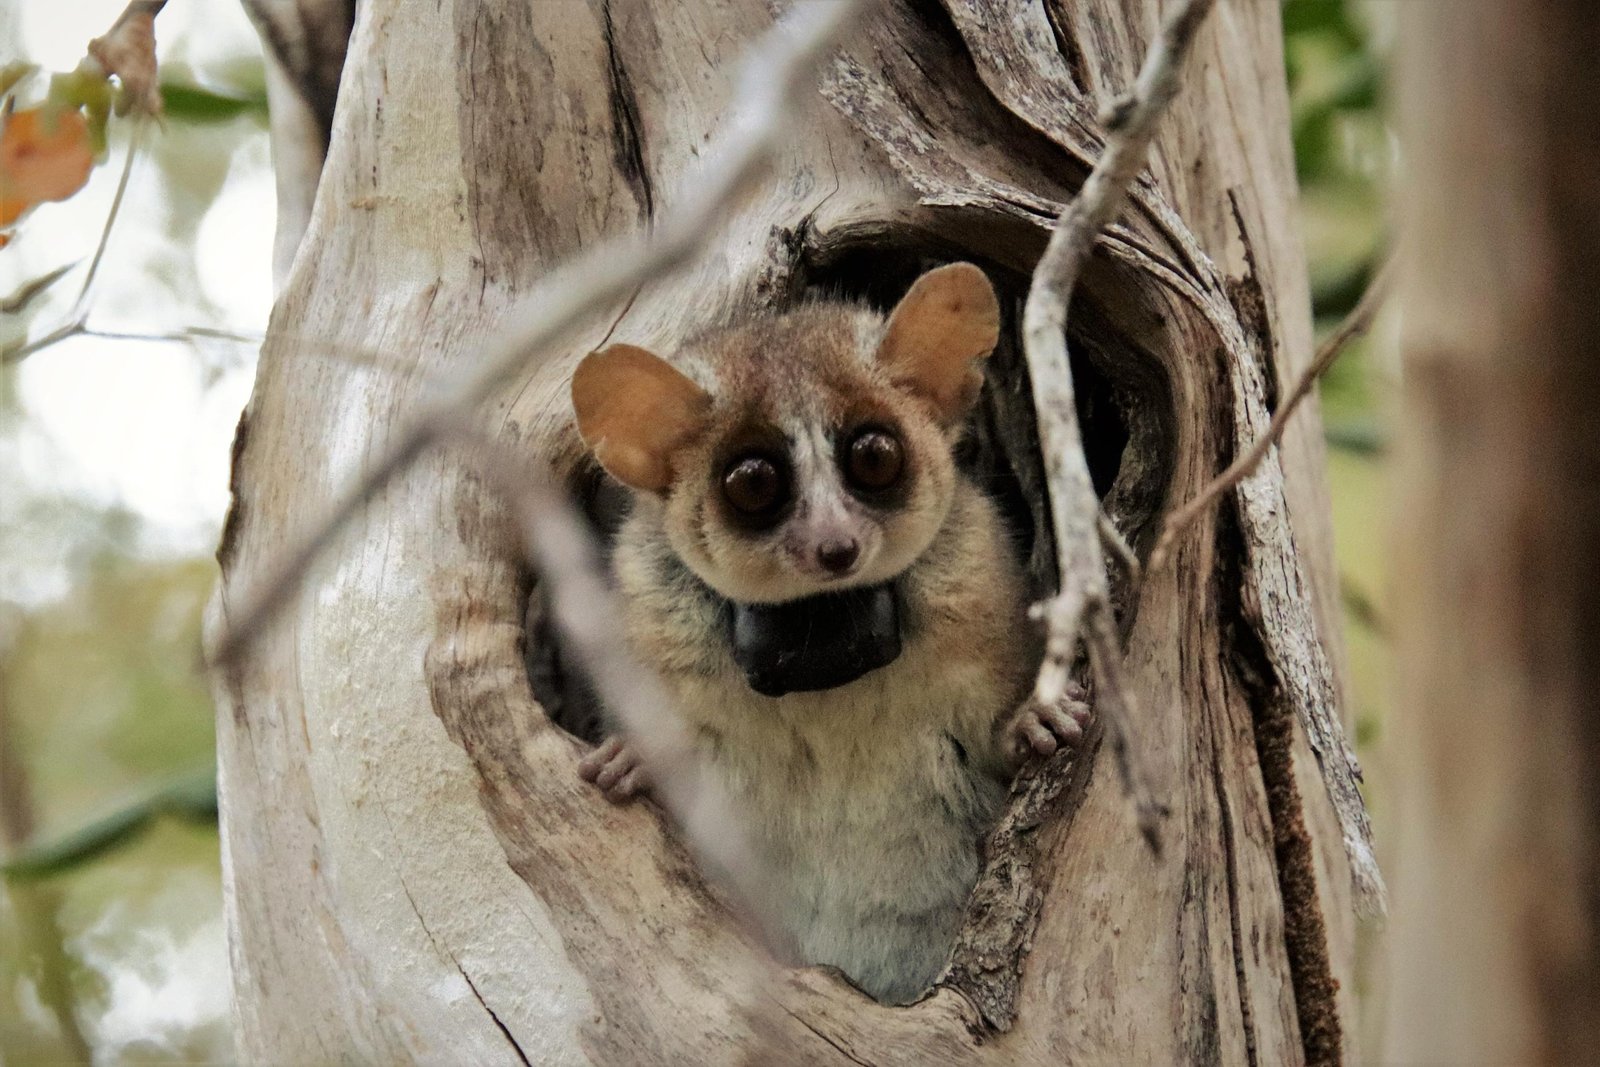 Insights on Intelligence and Lifespan From Mouse Lemurs